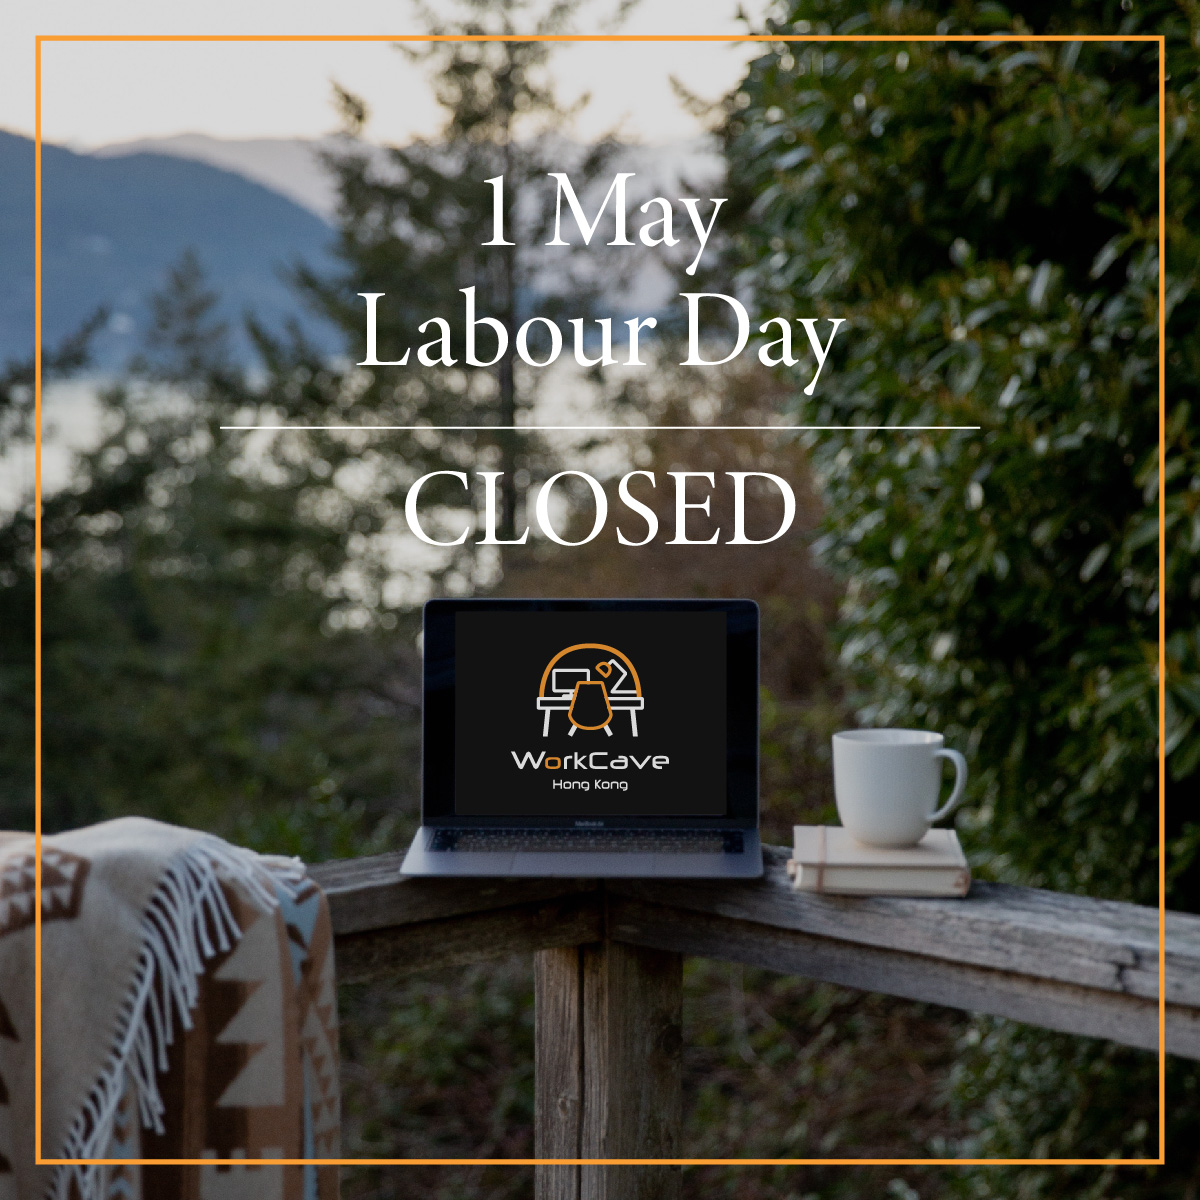 A graphic featuring blanket, laptop, tea cup and book putting on the wood fence, with the words "1 May Labout Day CLOSED"